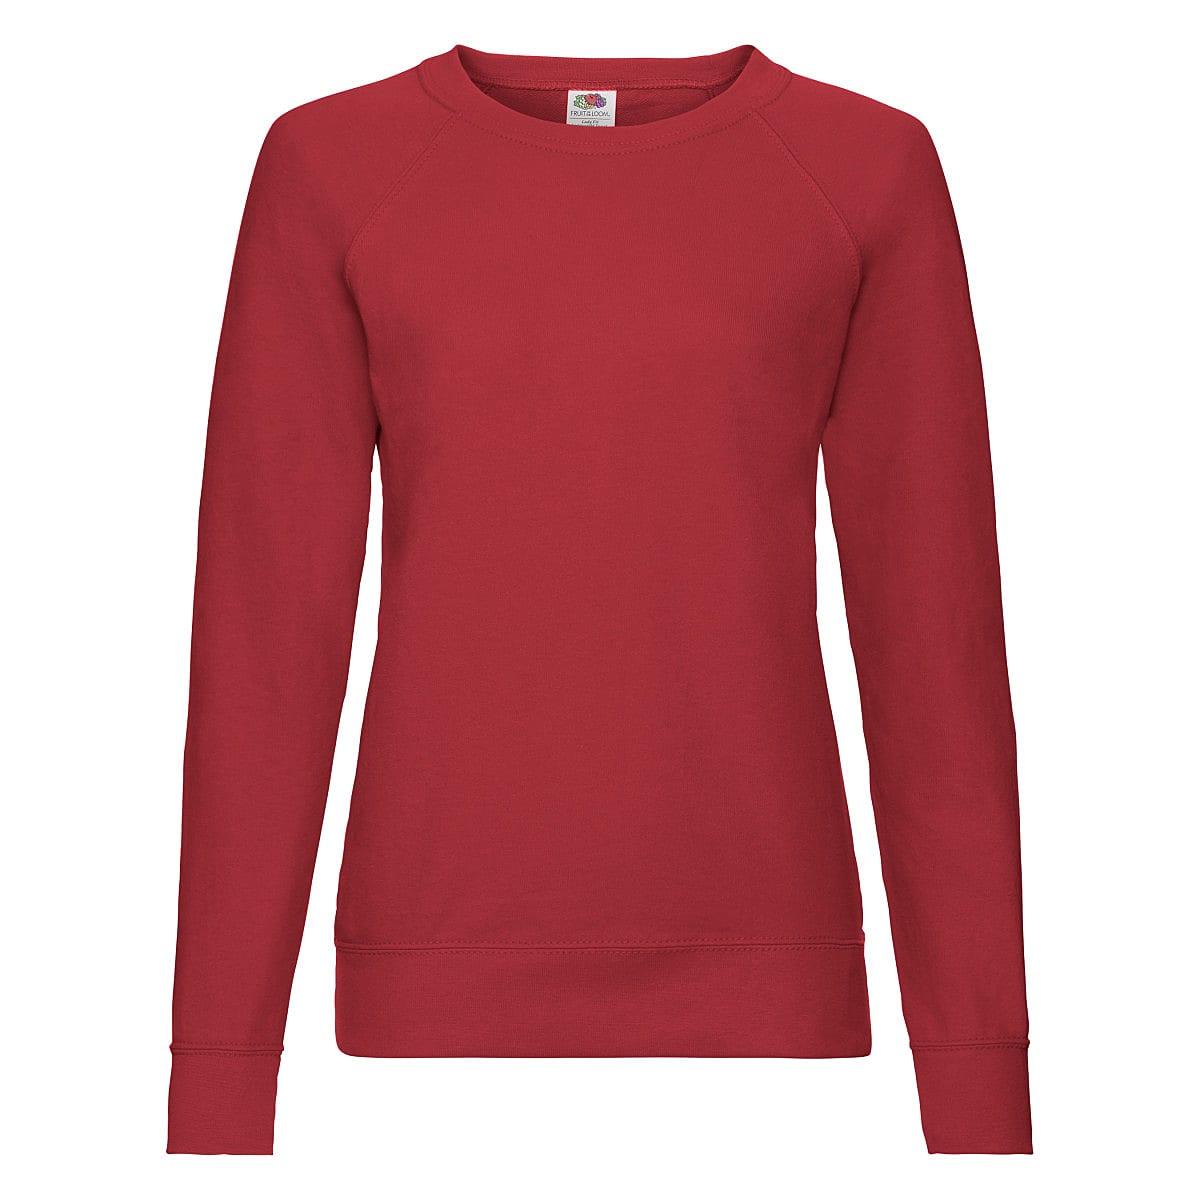 Fruit Of The Loom Lady-Fit Lightweight Raglan Sweater in Red (Product Code: 62146)